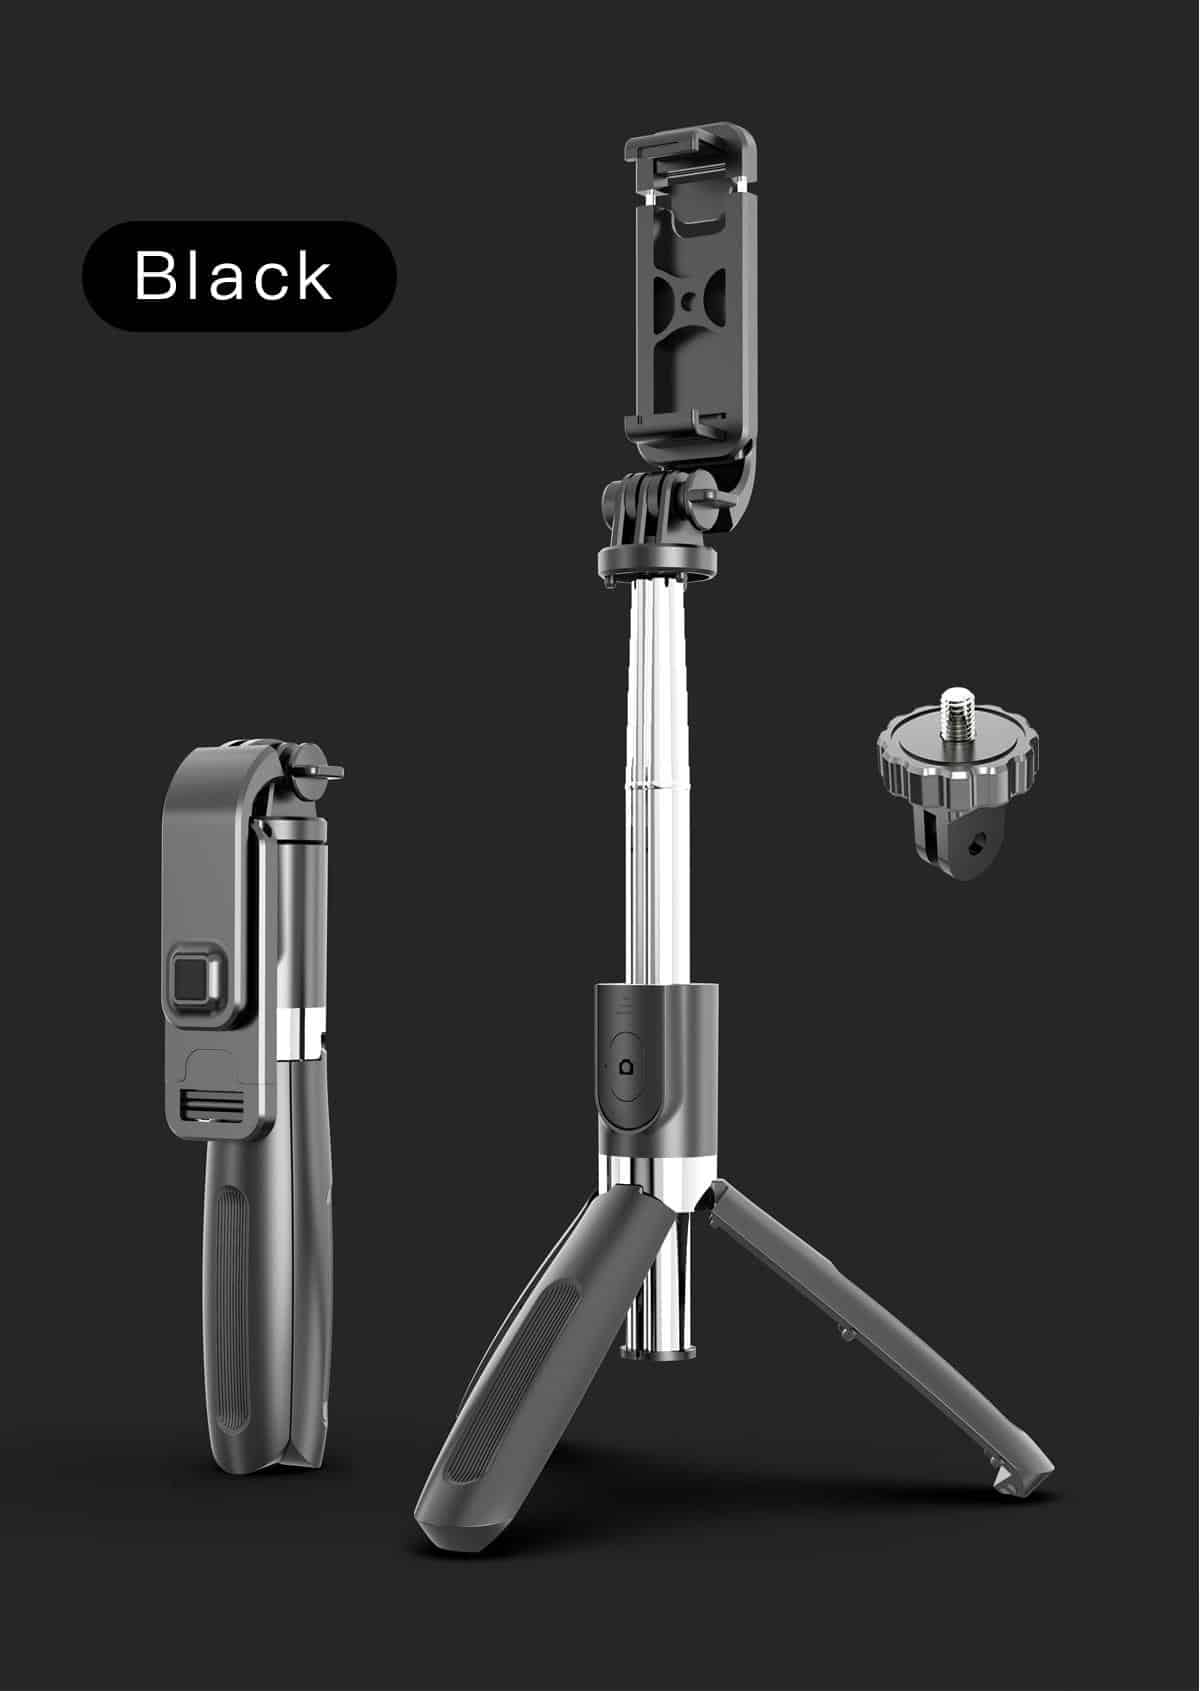 COOL DIER Portable Mini Tripod Collapsible Cell Phone Selfie Bracket Monopod For iPhone Samsung Xiaomi Huawei For Gopro 9 Camera